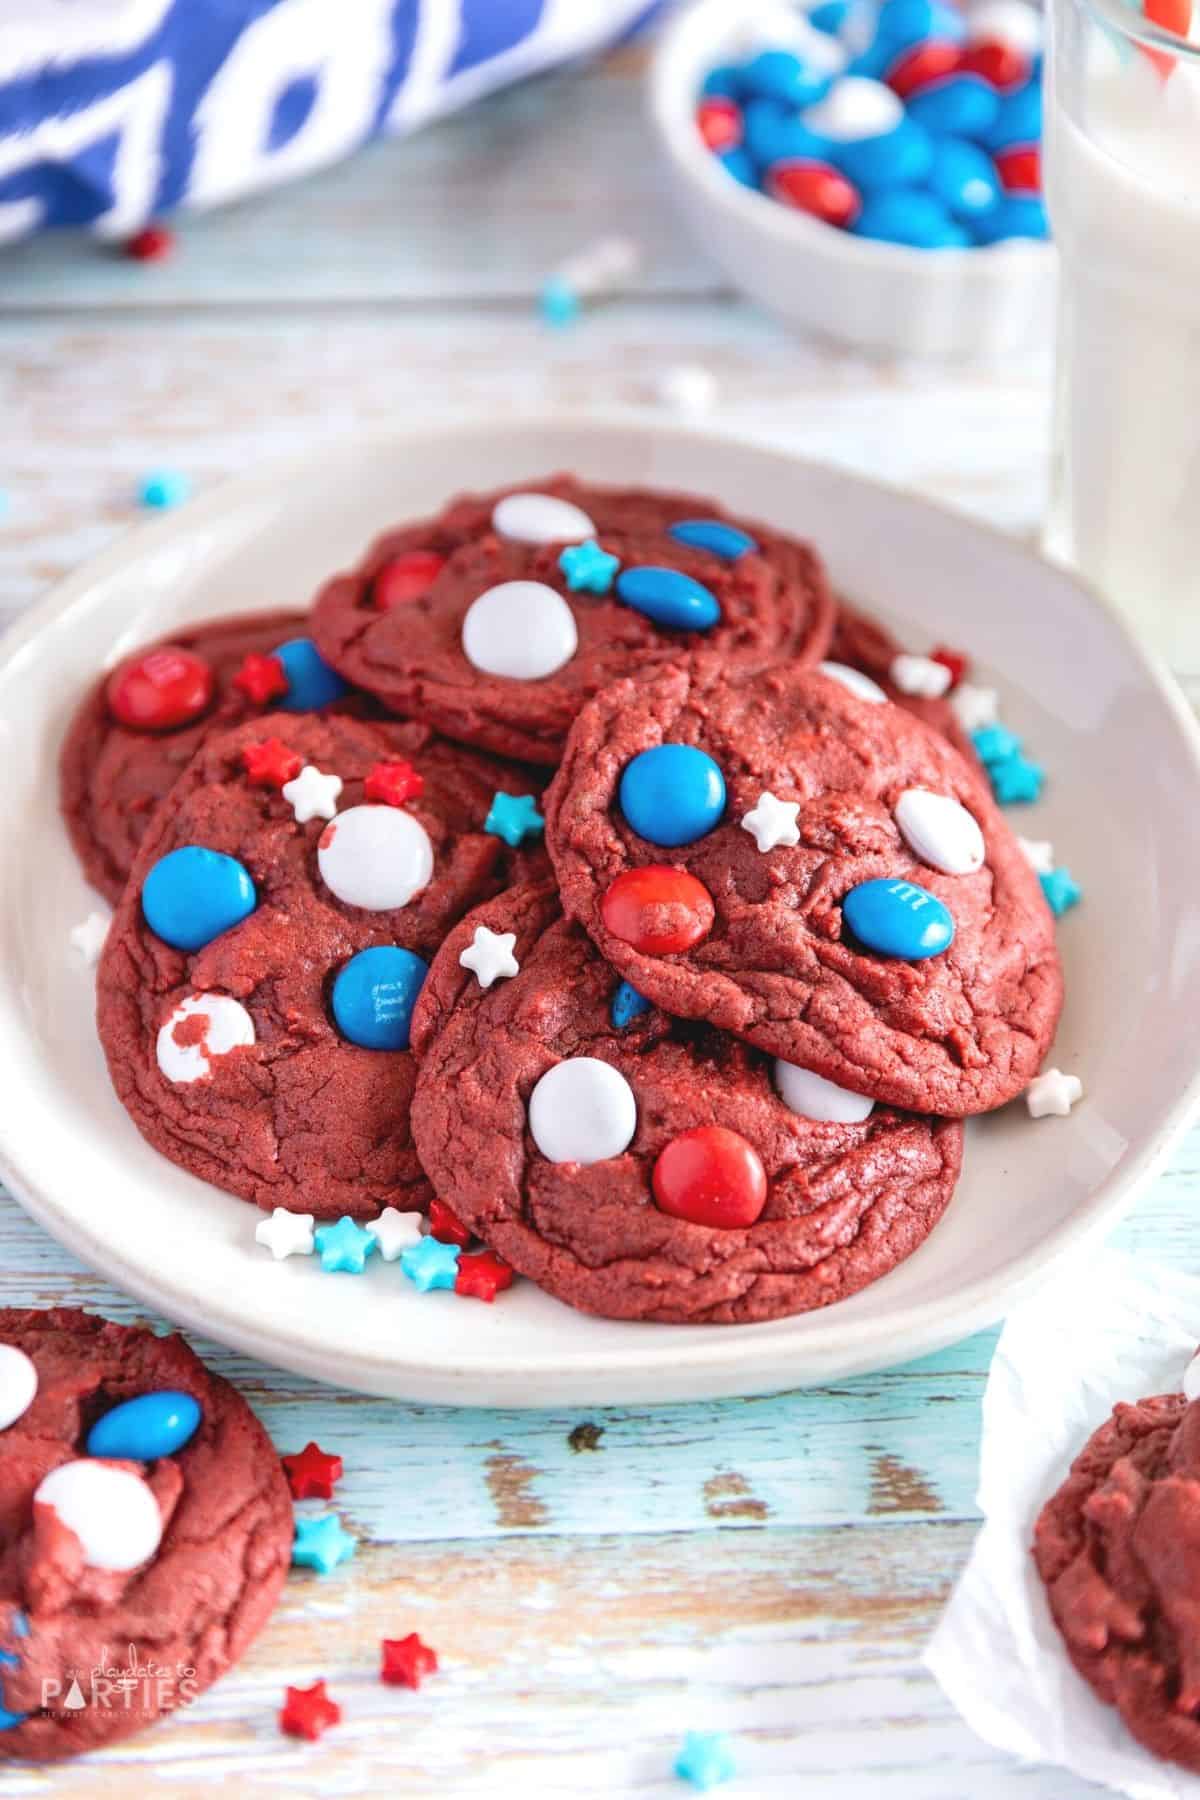 Red velvet cake mix cookies for July 4th with red white and blue M&Ms.